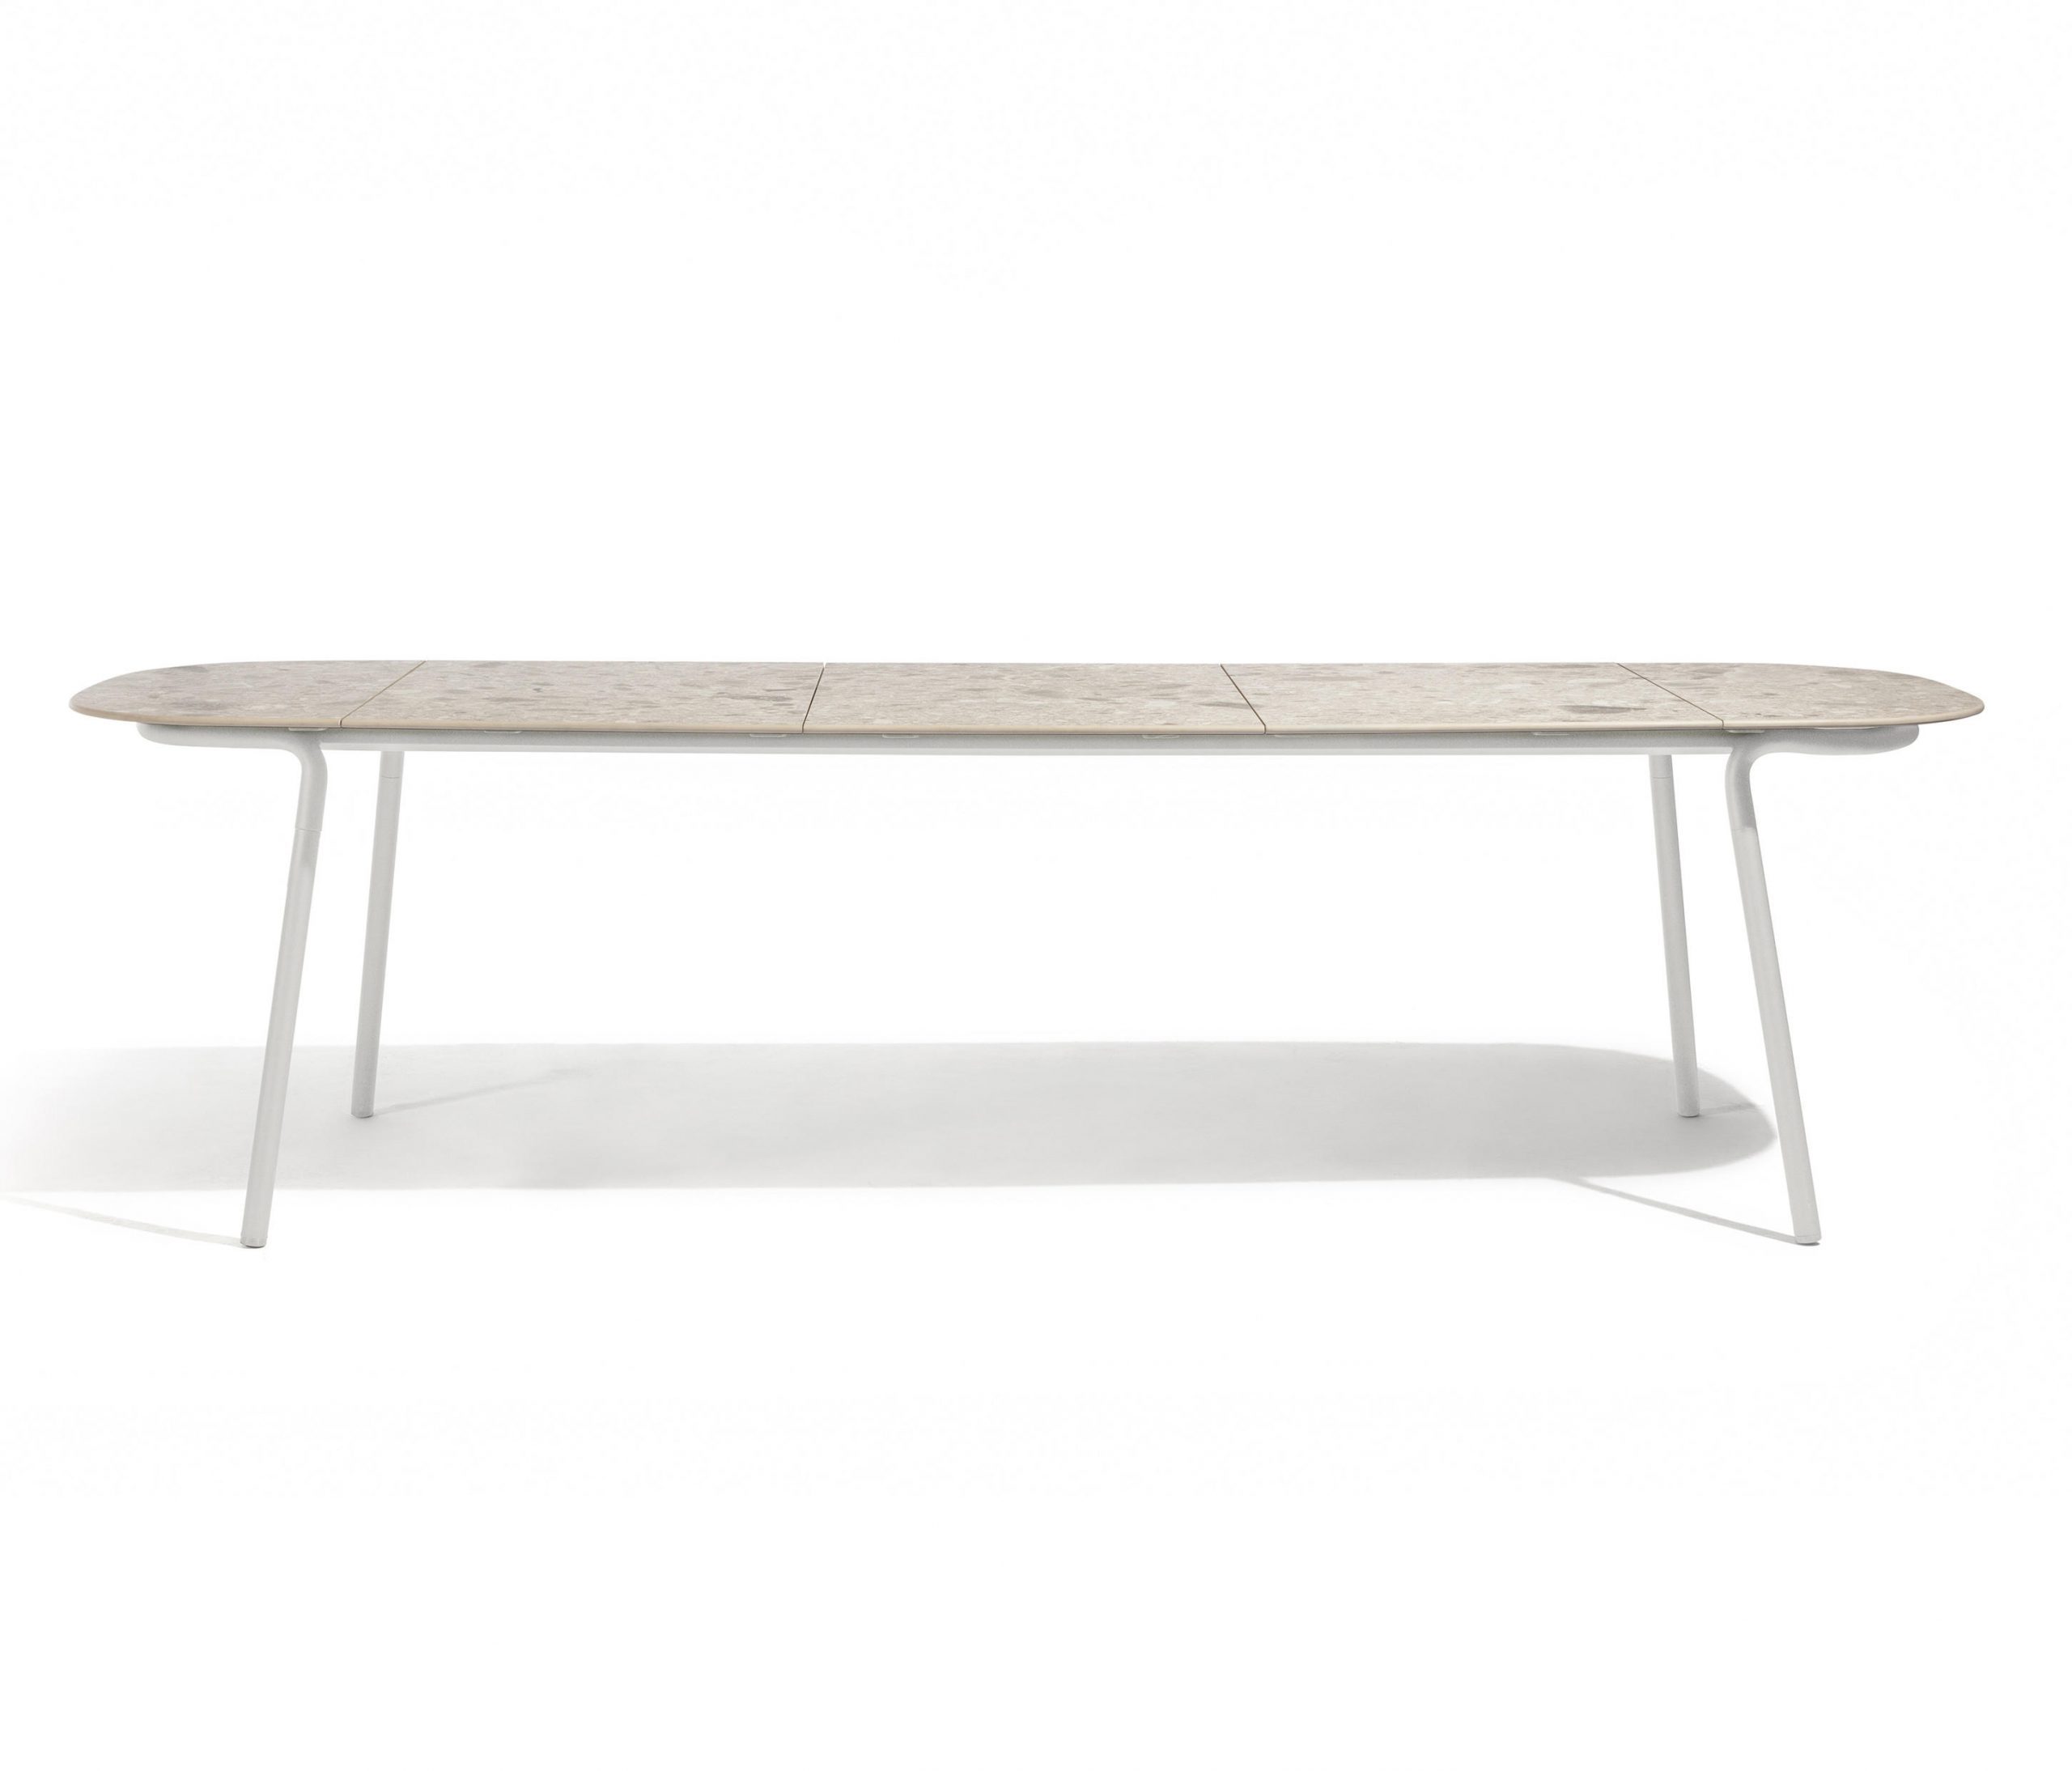 Minus Tables by Manutti